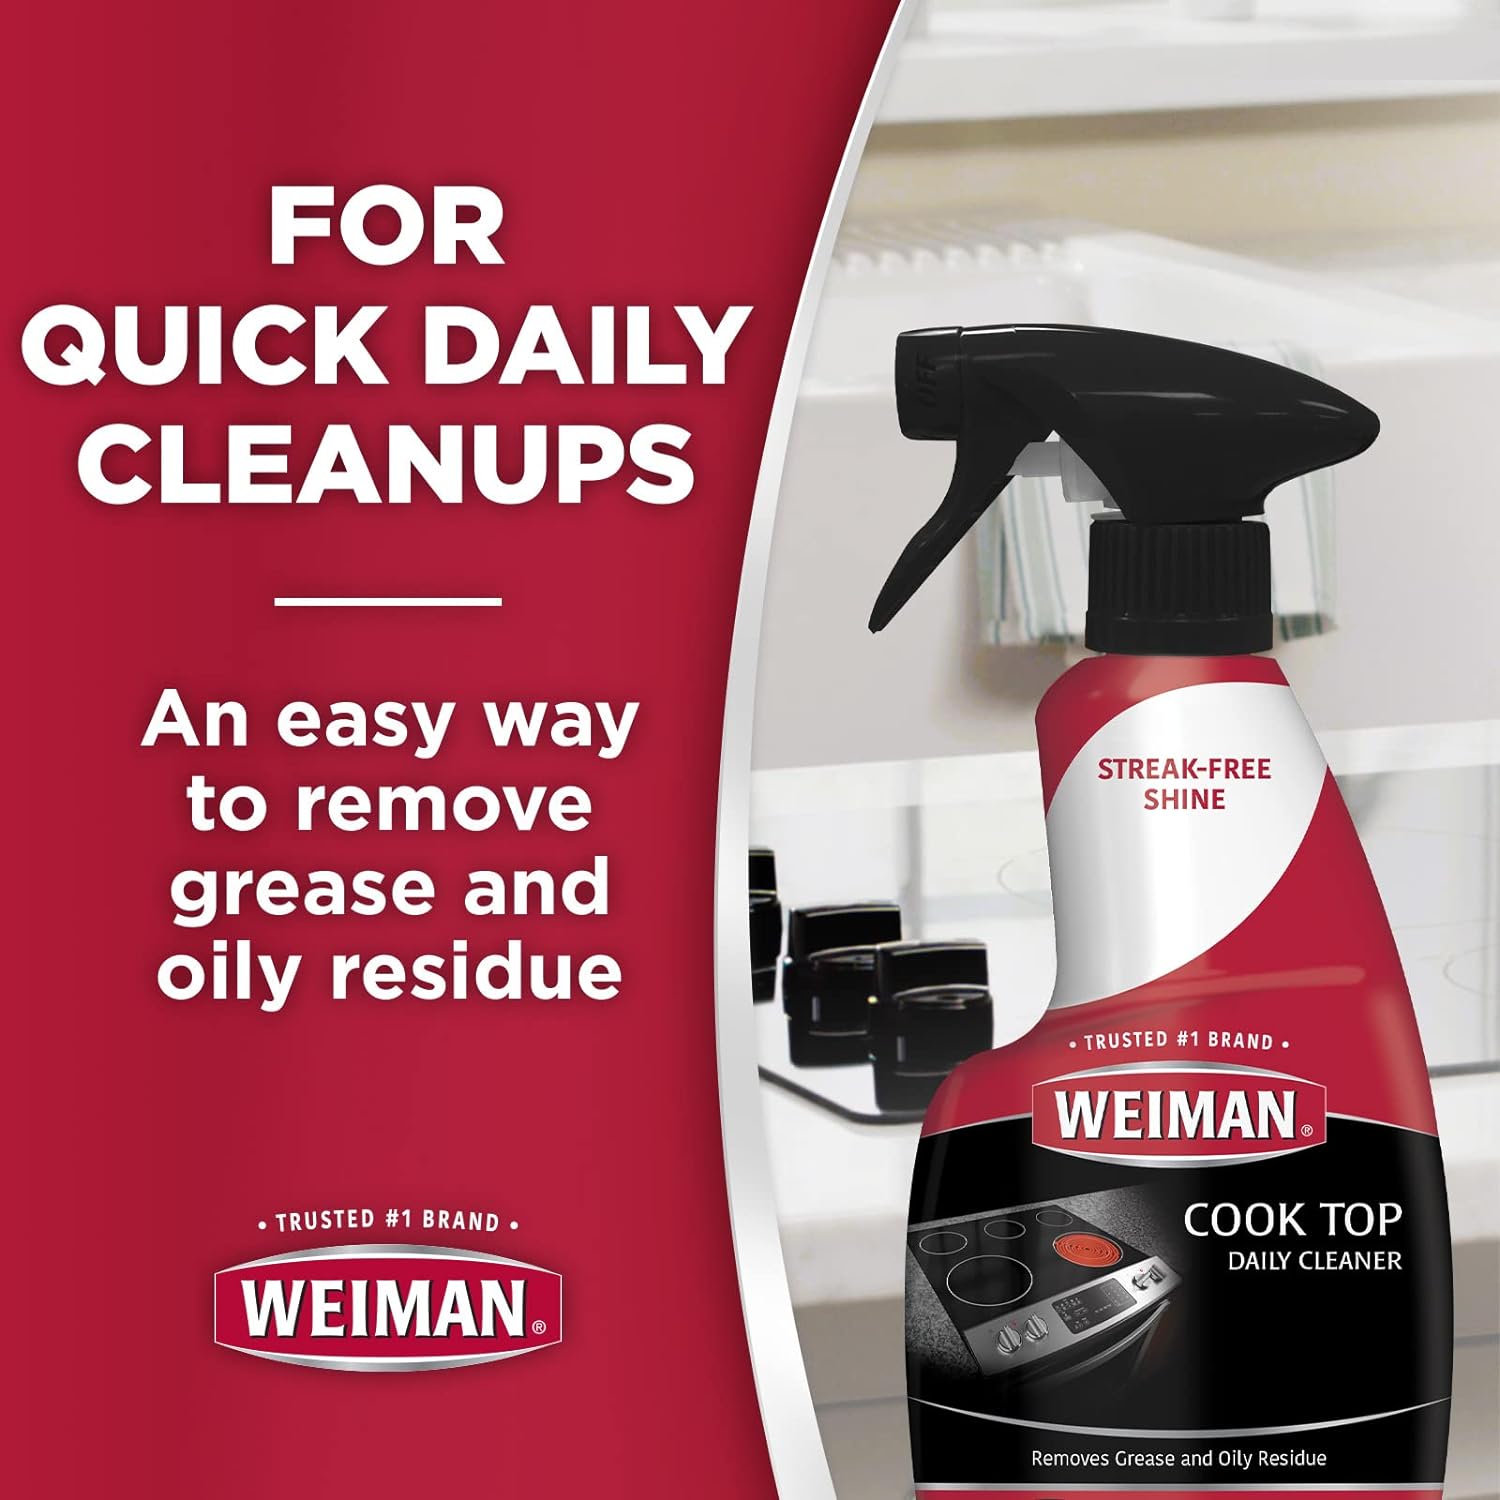 Weiman Ceramic and Glass Cooktop - 10 Ounce - Stove Top Daily Cleaner Kit - 12 Ounce - Glass Induction Cooktop Cleaning Bundle for Heavy Duty Mess Cleans Burnt-on Food : Health & Household